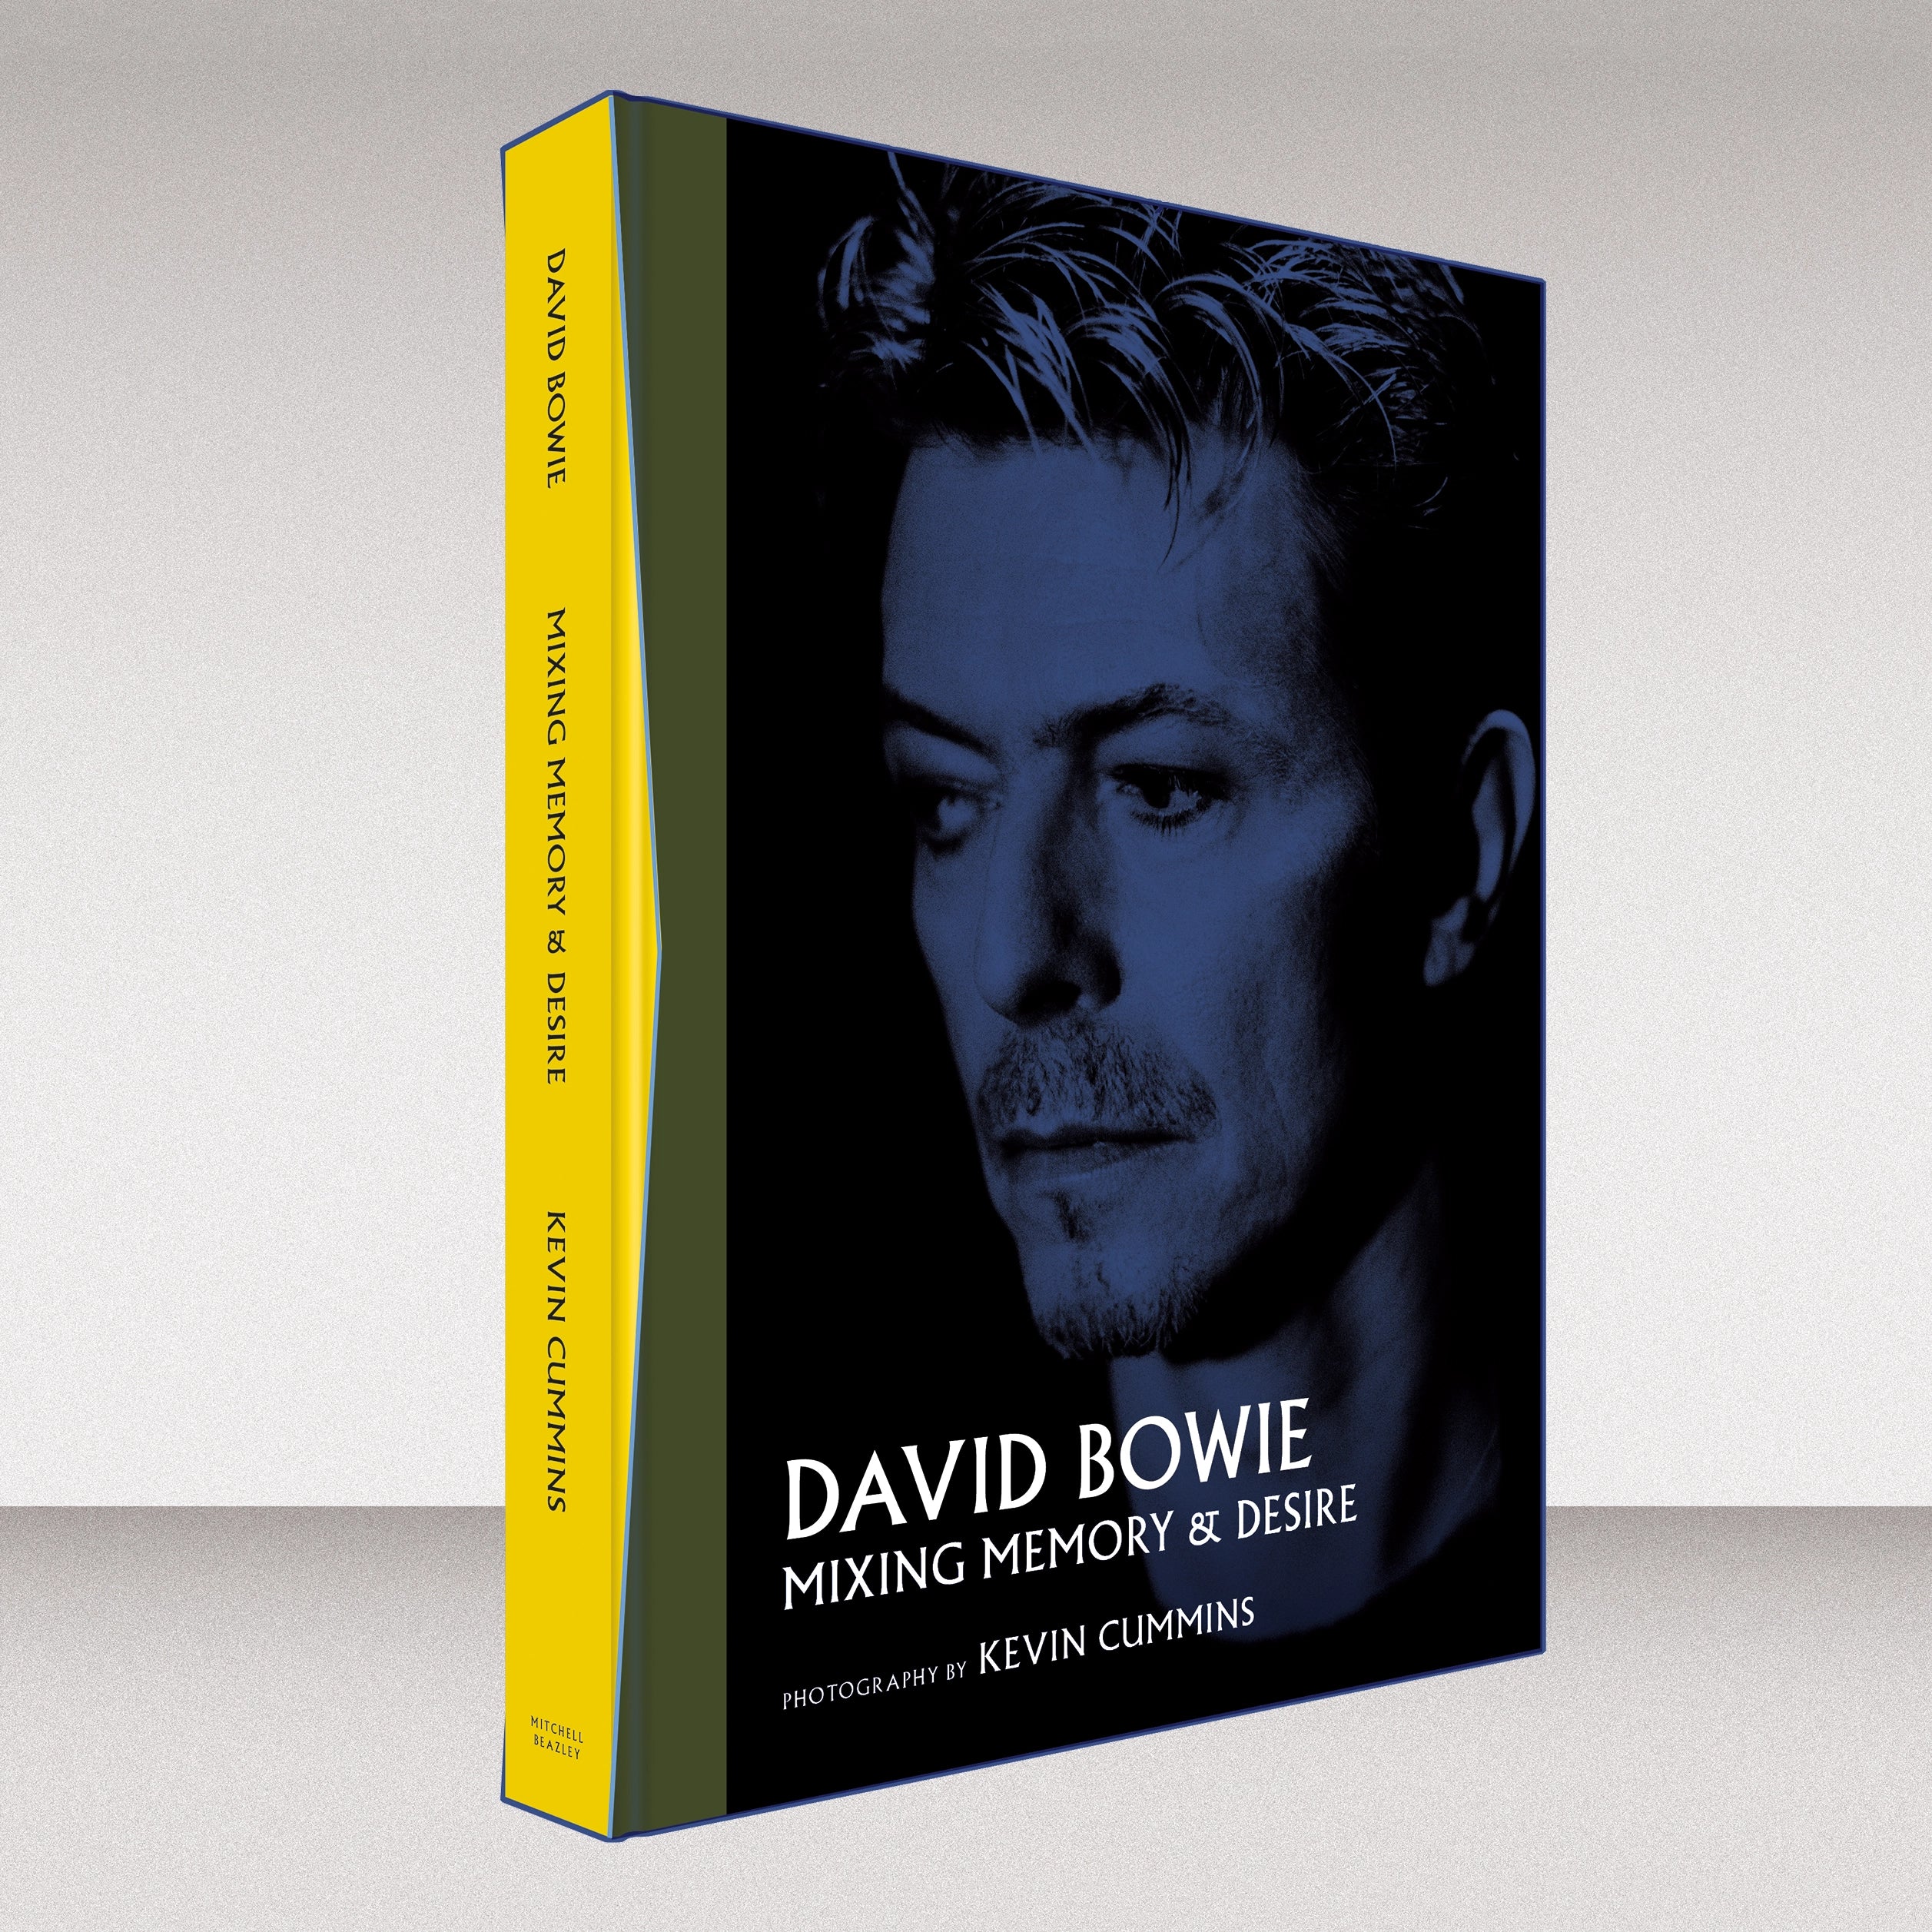 Kevin Cummins - David Bowie - Mixing Memory & Desire (Photographs by Kevin Cummins): Special Edition Hardback Book